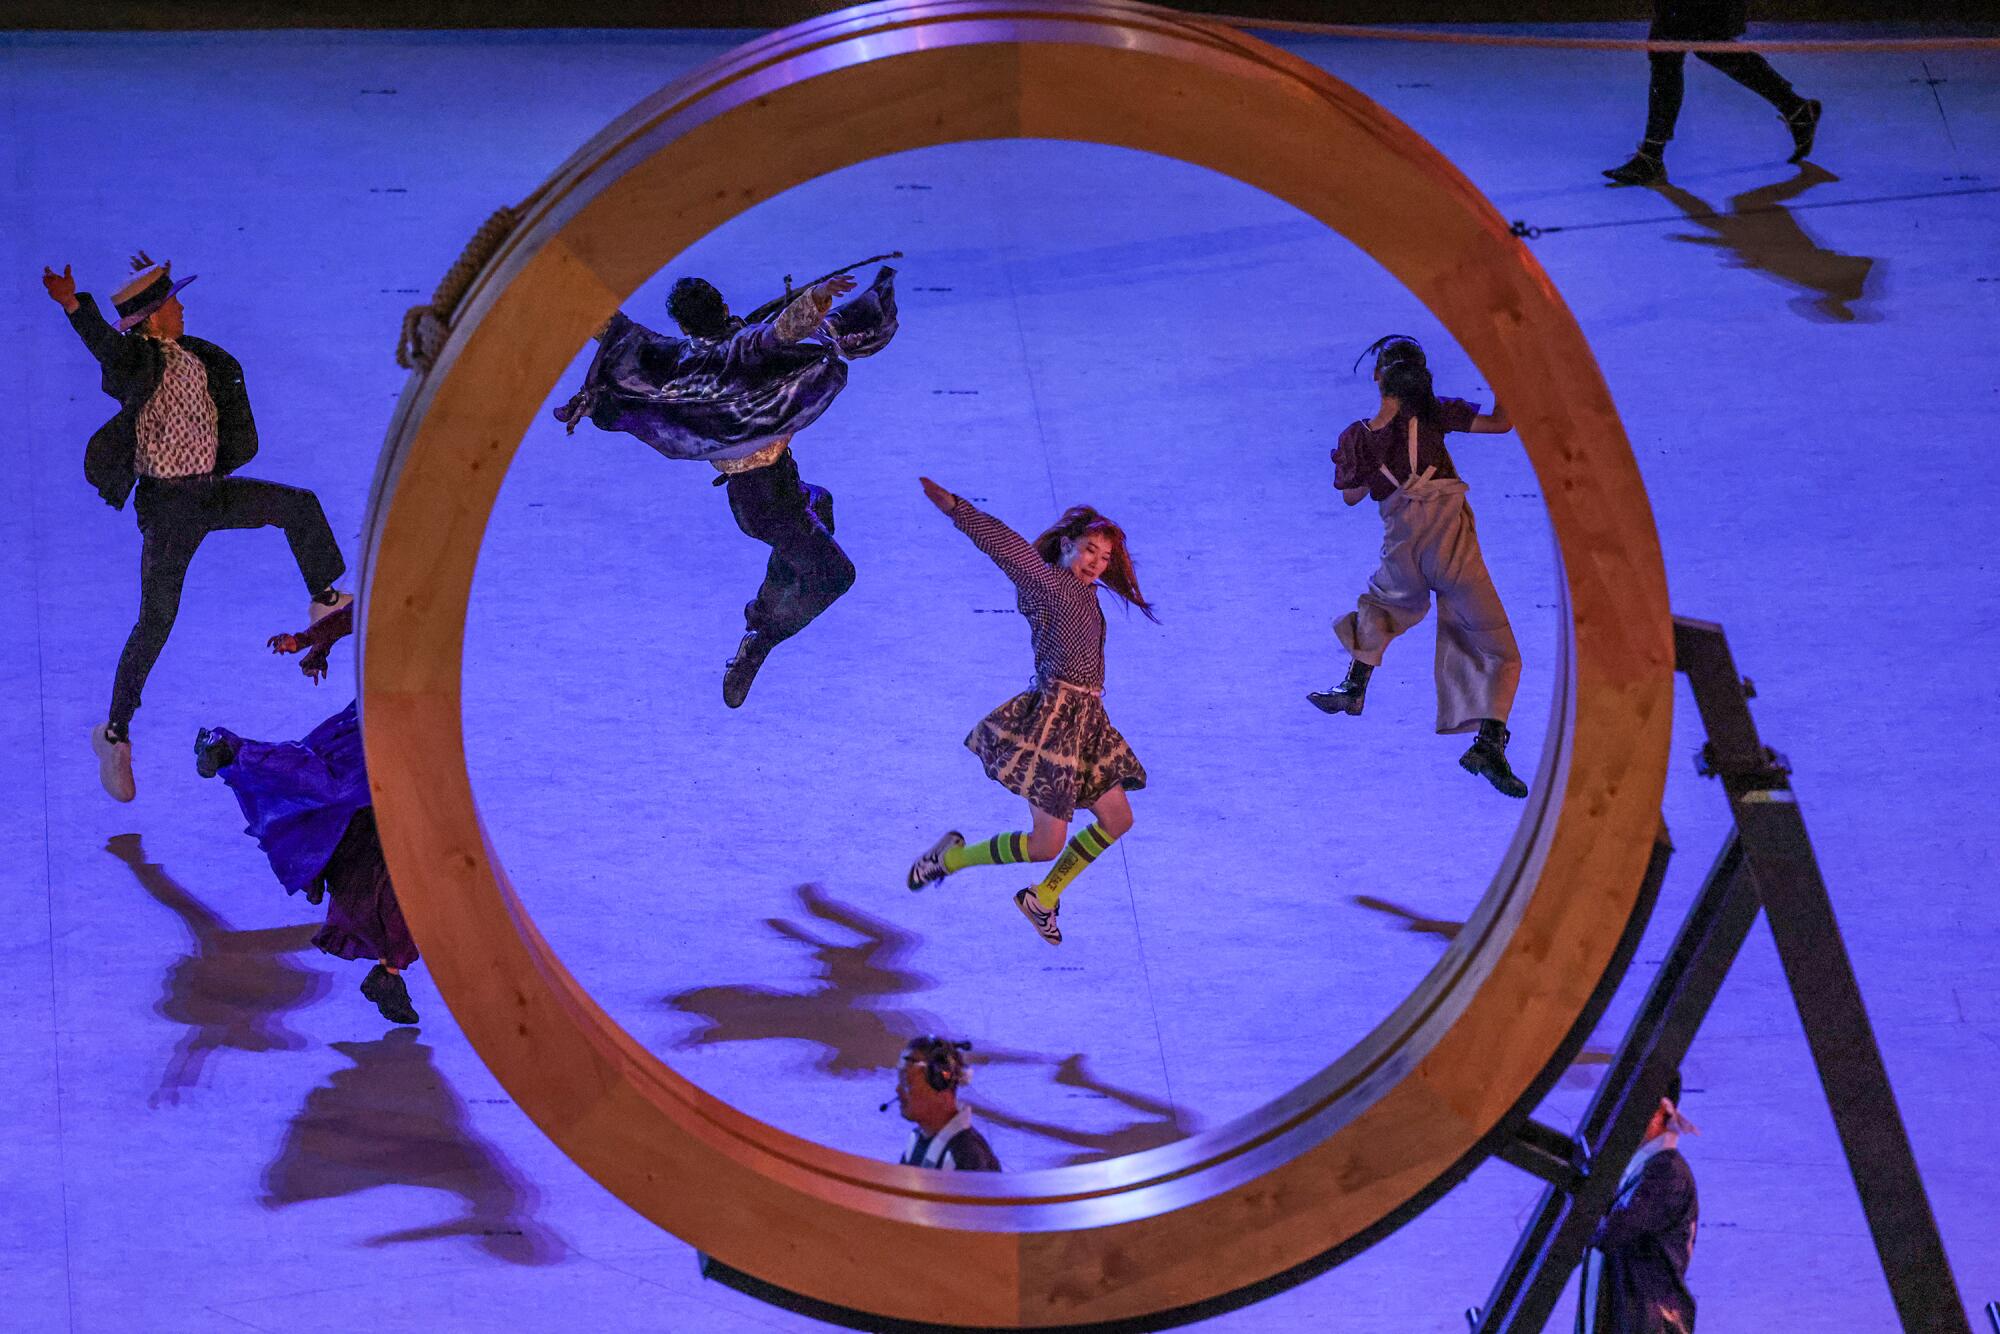 Dancers are framed inside an Olympic ring